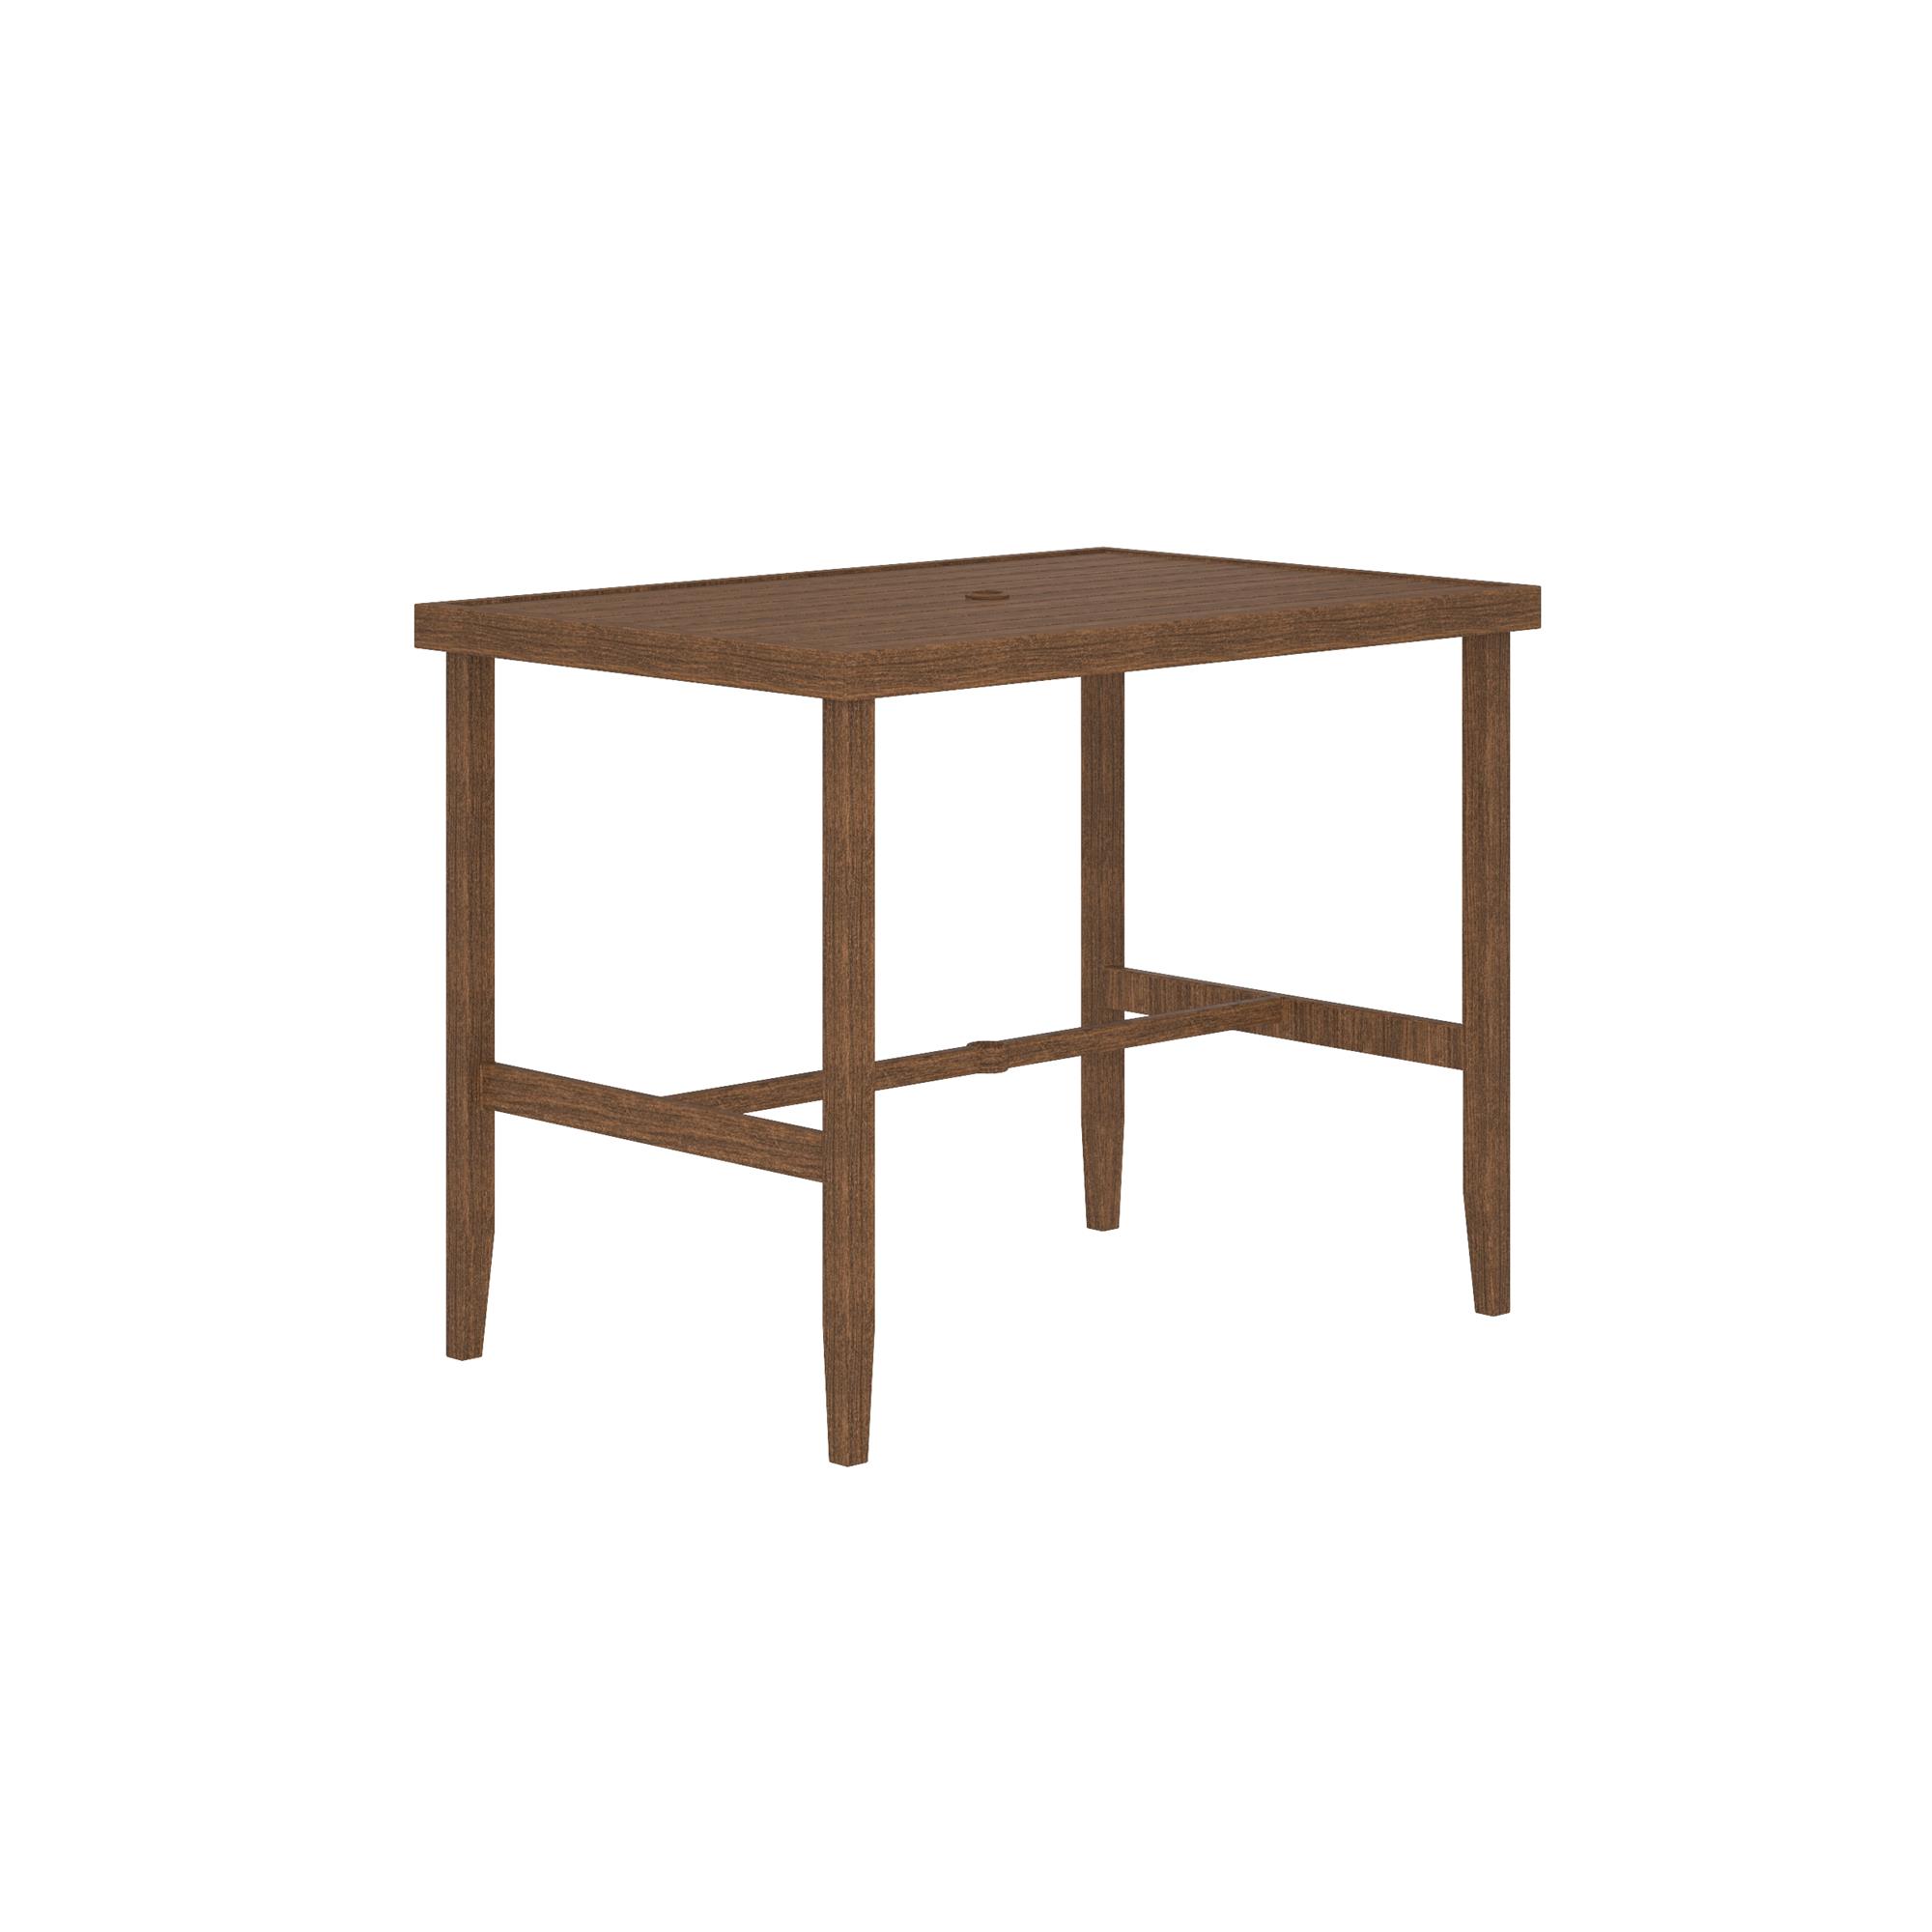 COSCO Outdoor Living, Patio Bar Table, Steel, Brown - image 2 of 8